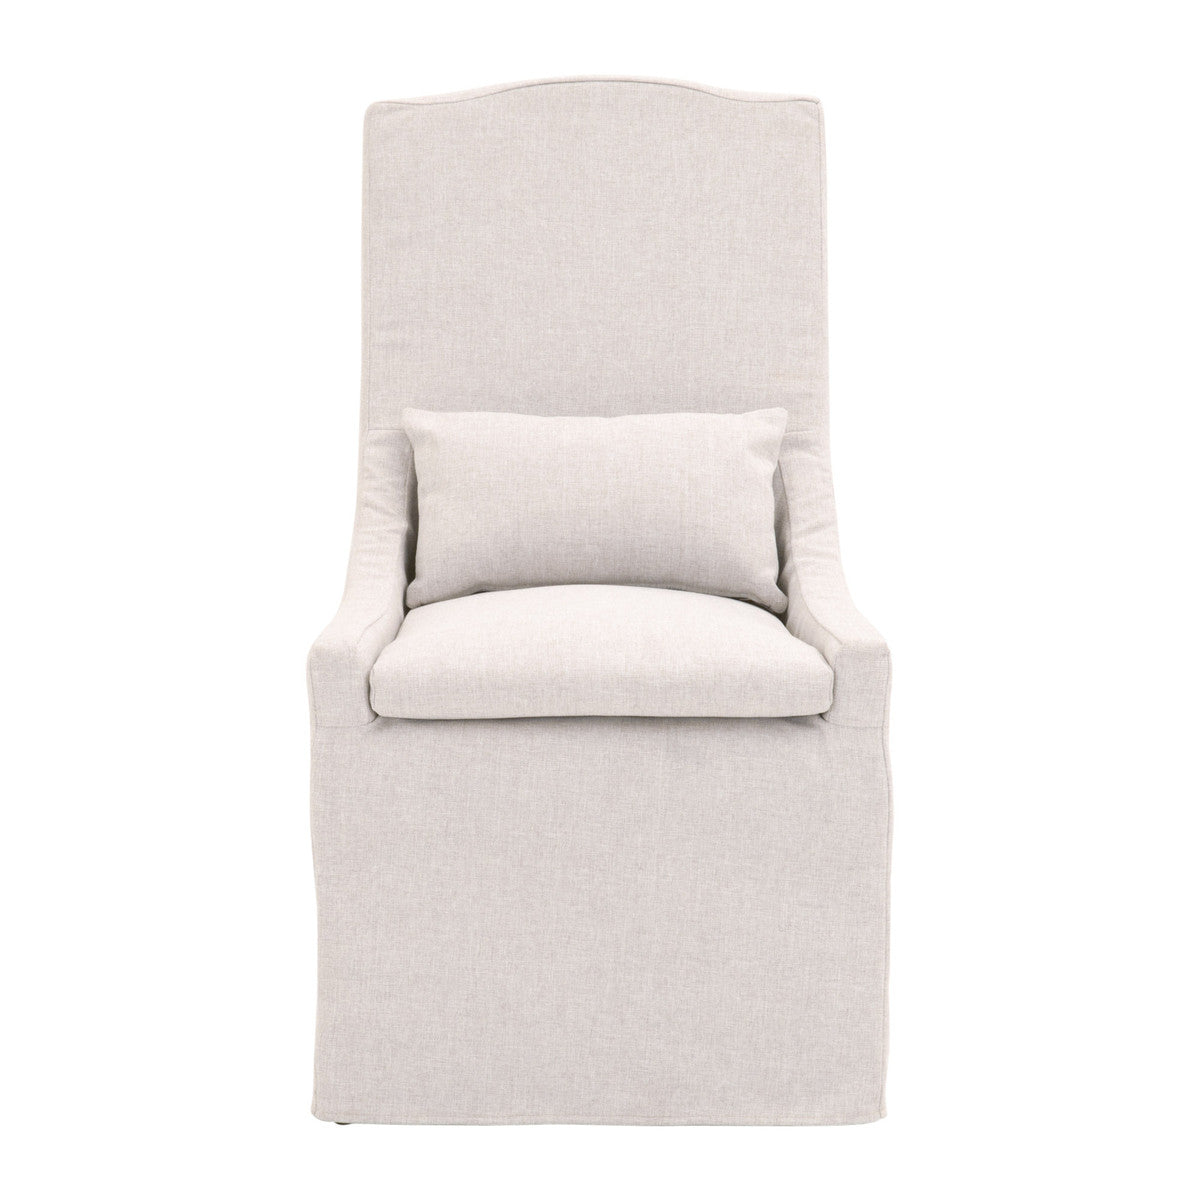 Adele Outdoor Slipcover Dining Chair